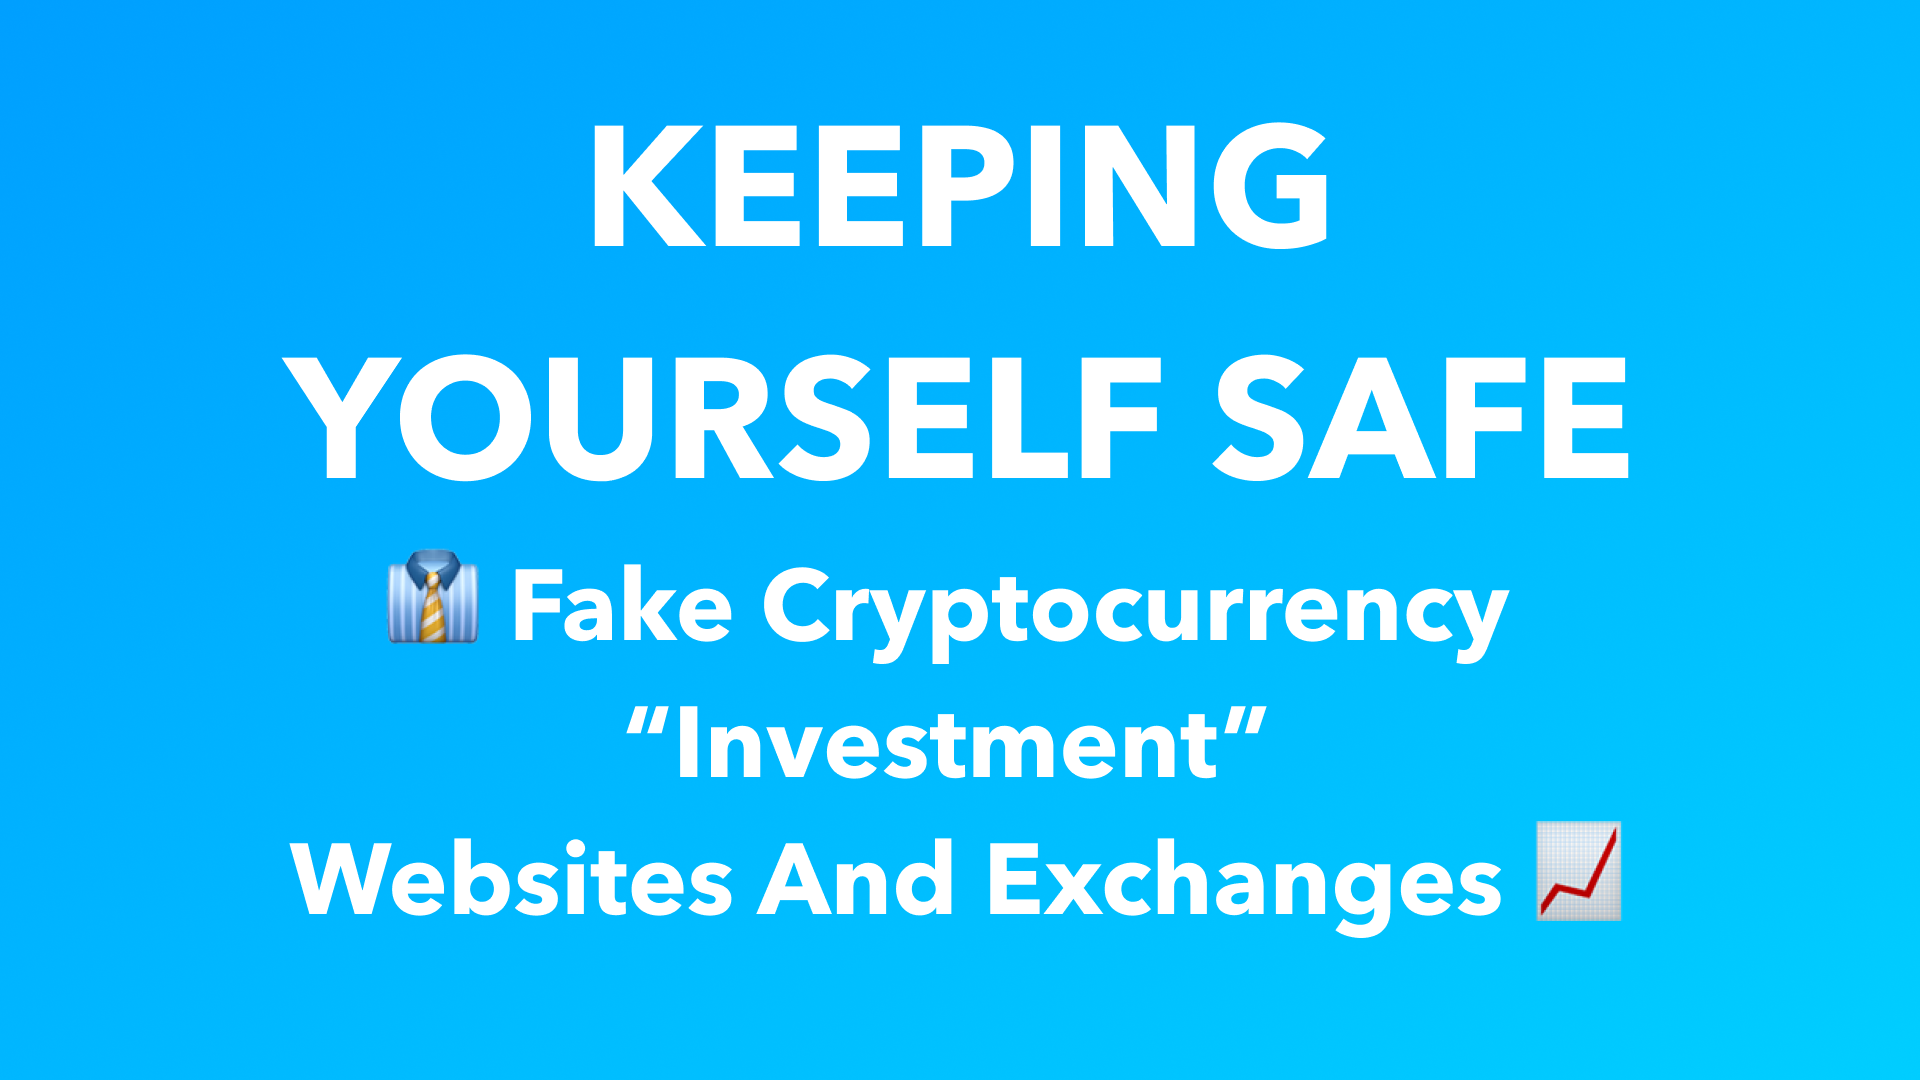 Keeping Yourself Safe: Fake Cryptocurrency Investment Websites and Exchanges